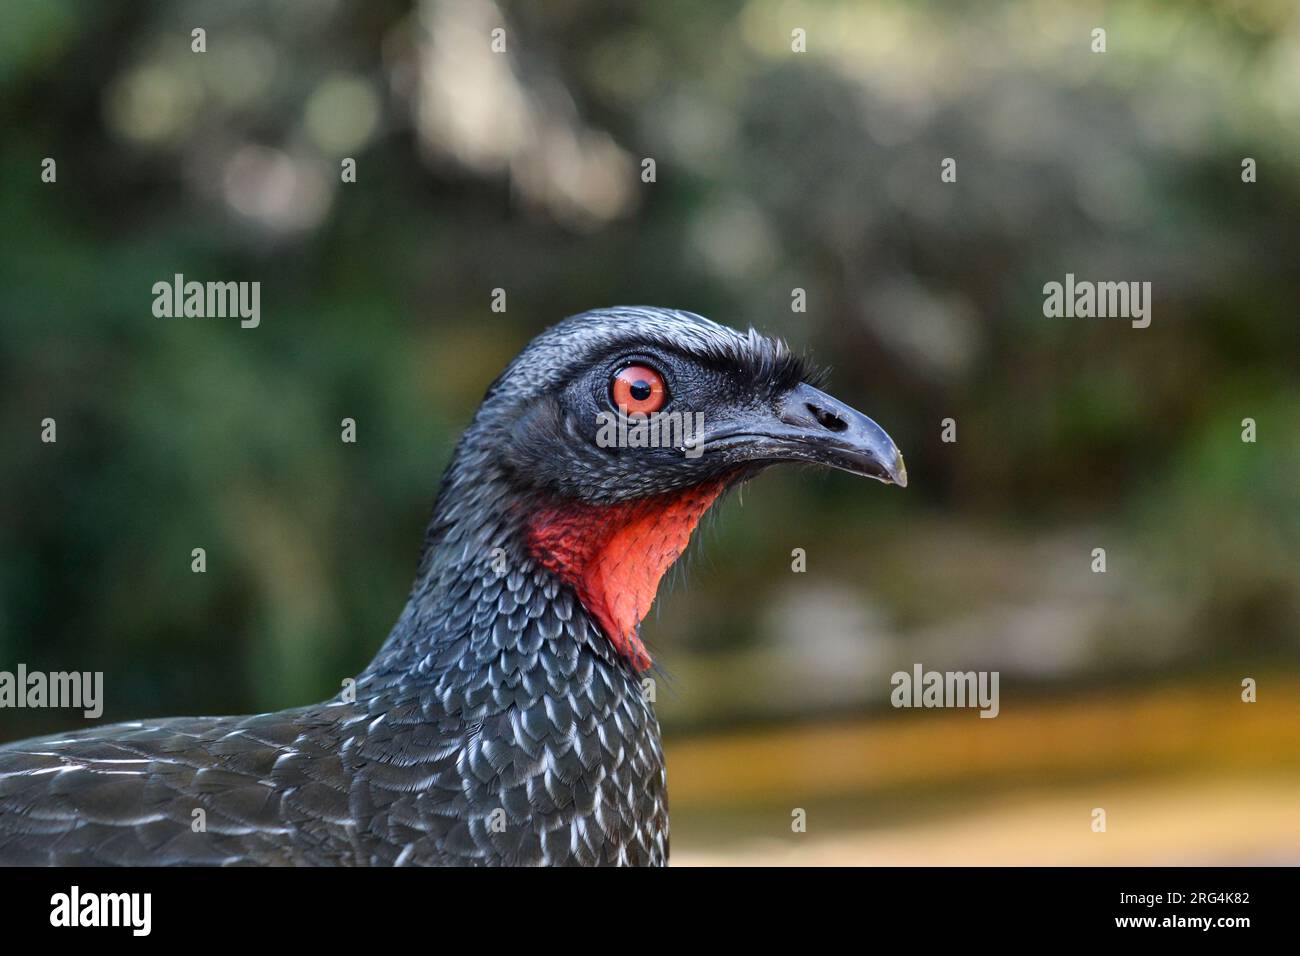 Typical guans looking and close-up feather Stock Photo